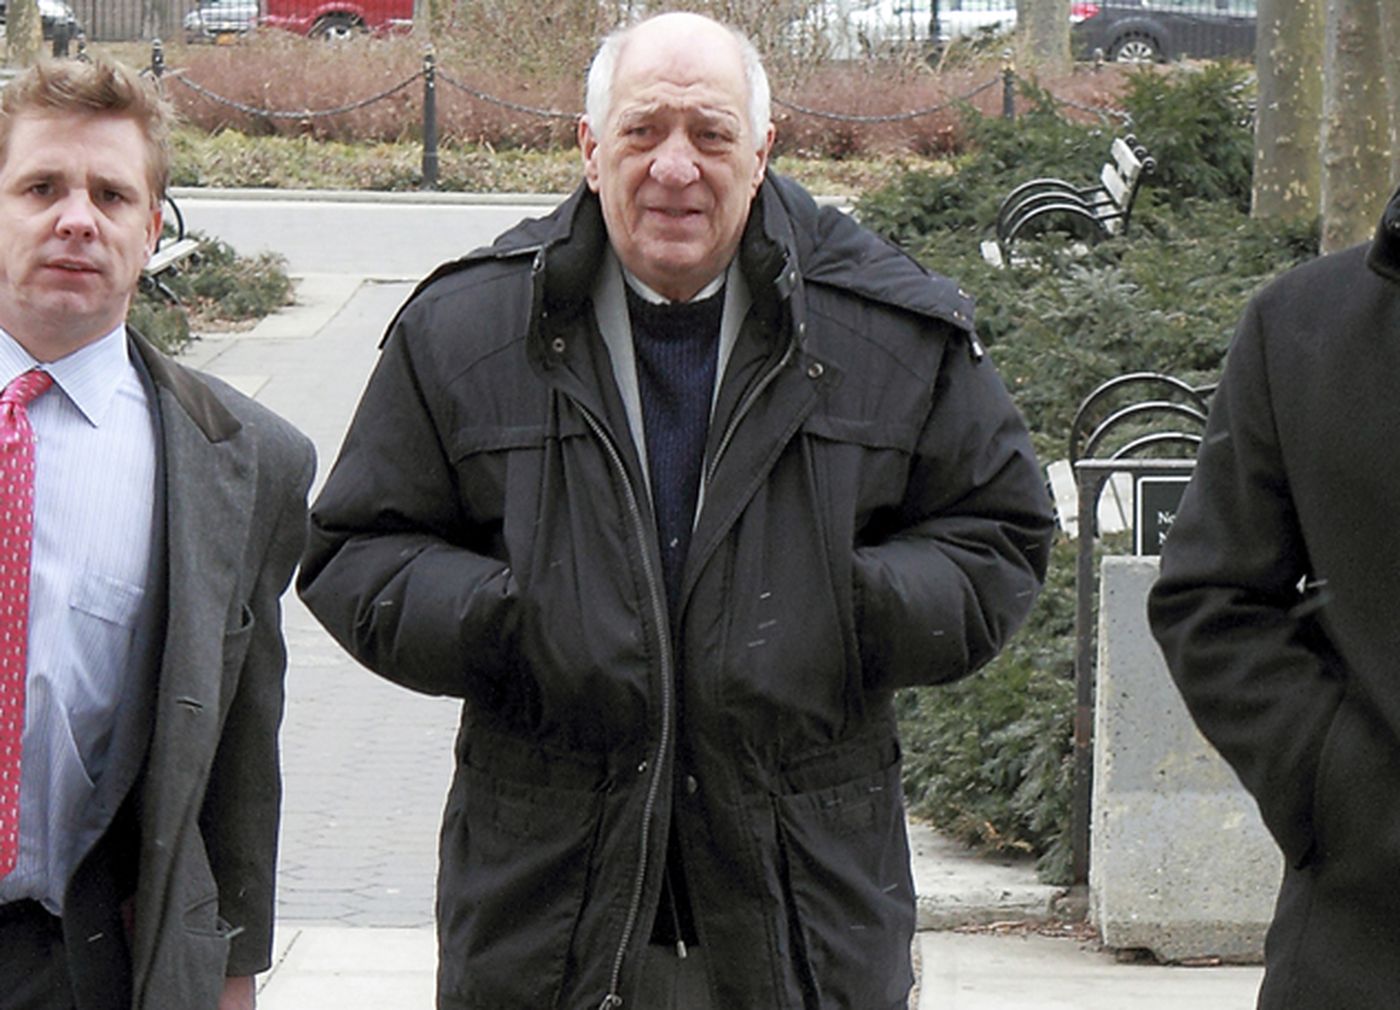  Andrew Russo arriving at Brooklyn Federal Court -  NY Daily News , Mar. 22, 2013 